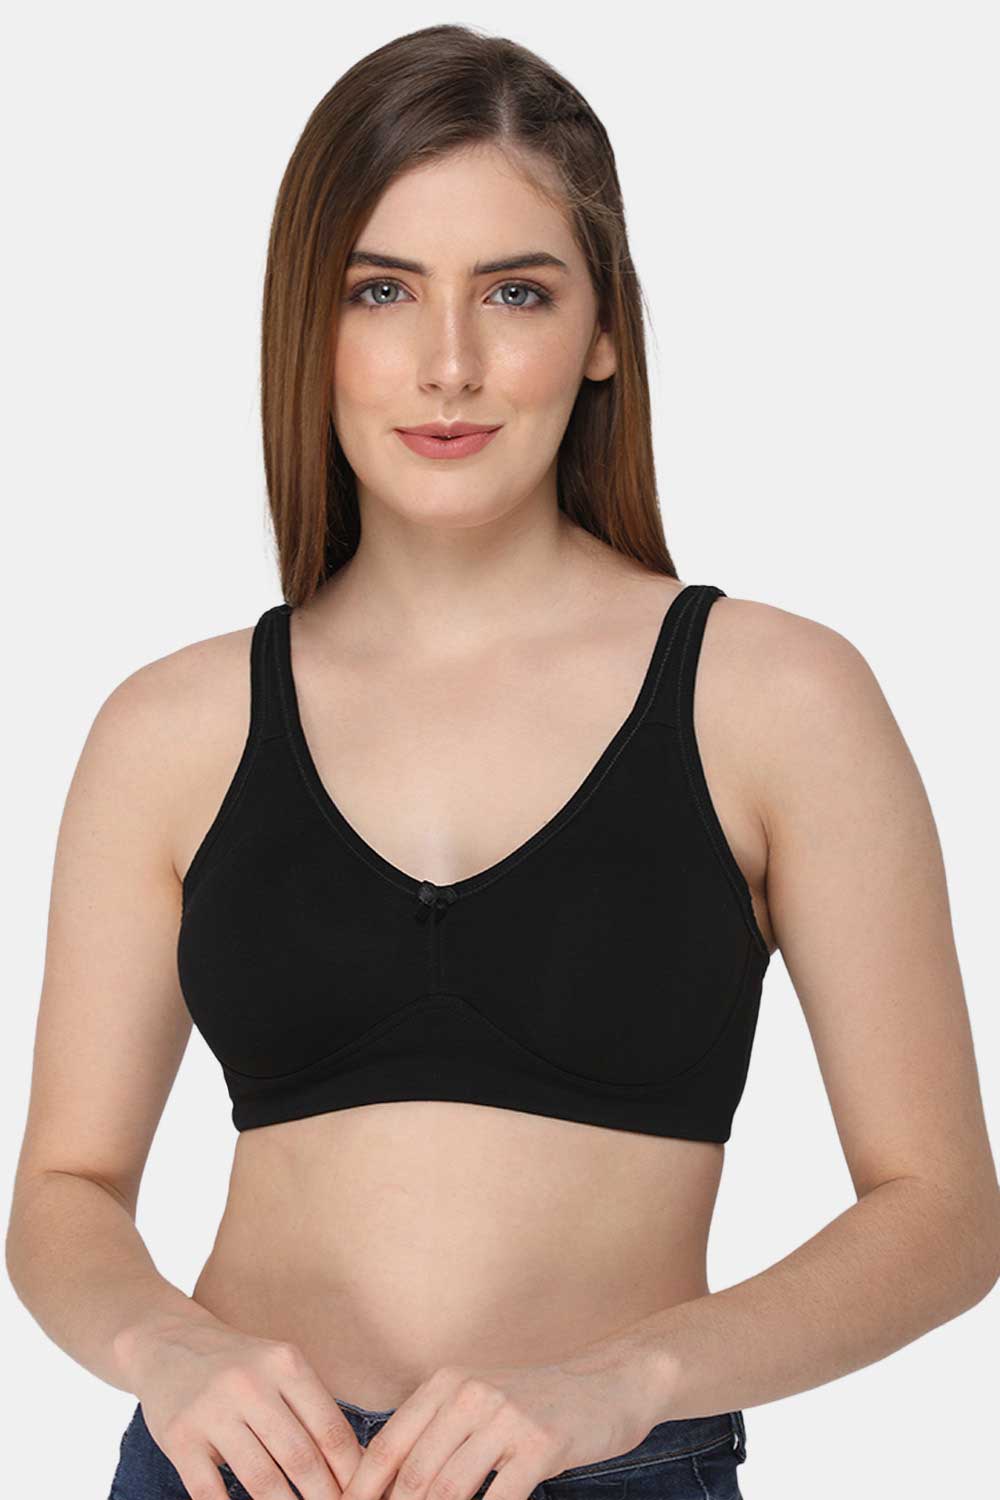 Buy online Black Solid Bra & Panty Set from lingerie for Women by You  Forever for ₹600 at 14% off